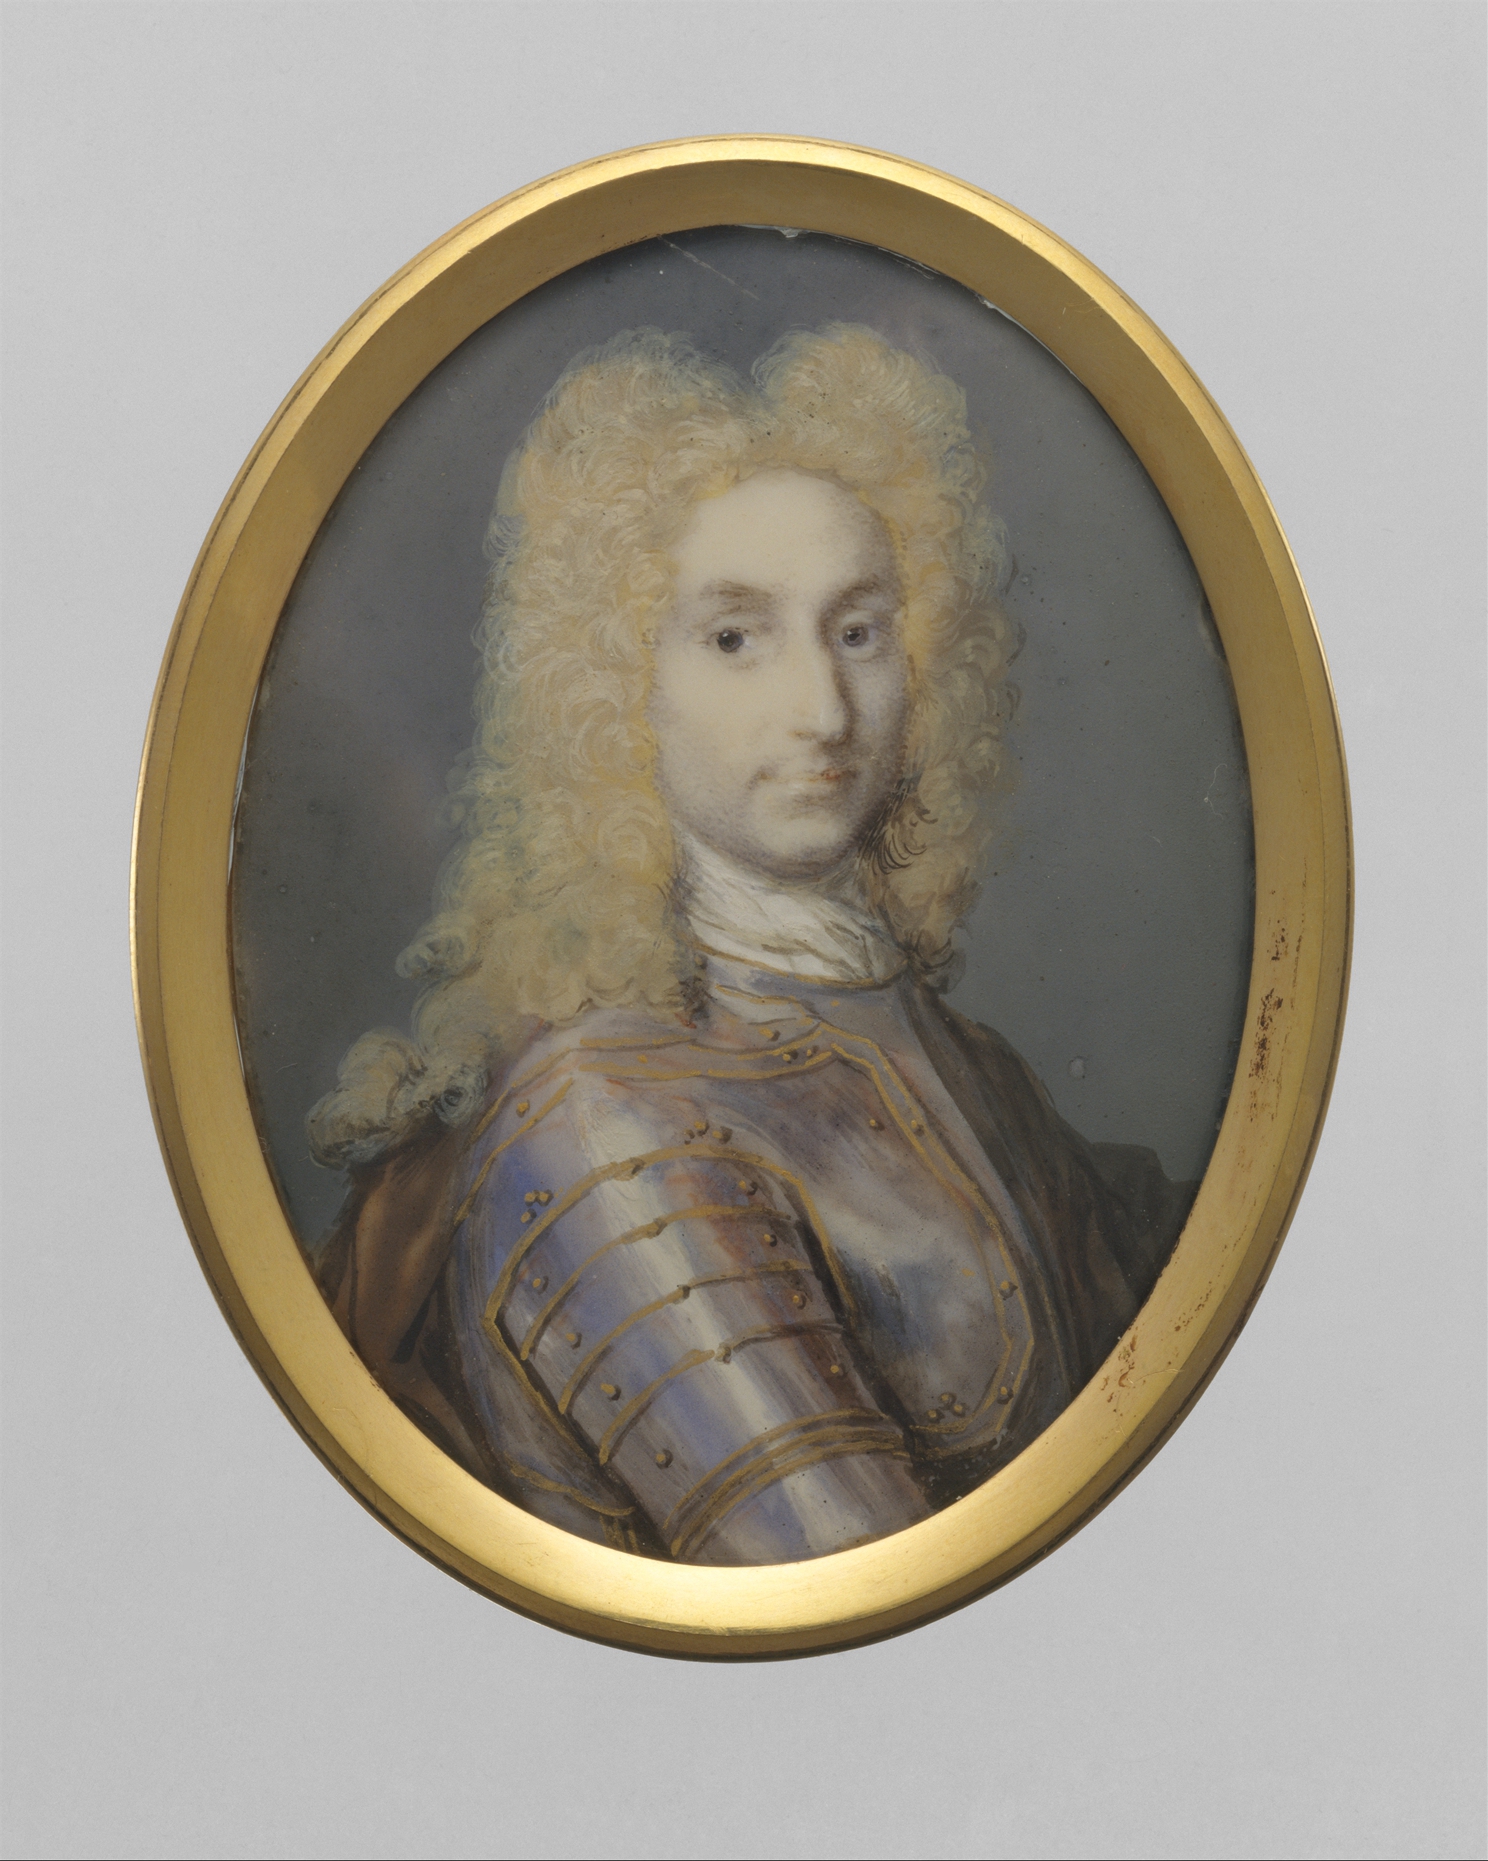 An oval miniature portrait of a man, cropped just below his chest. He is wearing an elaborate eighteenth-century wig and an elaborate costume to match. He looks at the viewer directly.